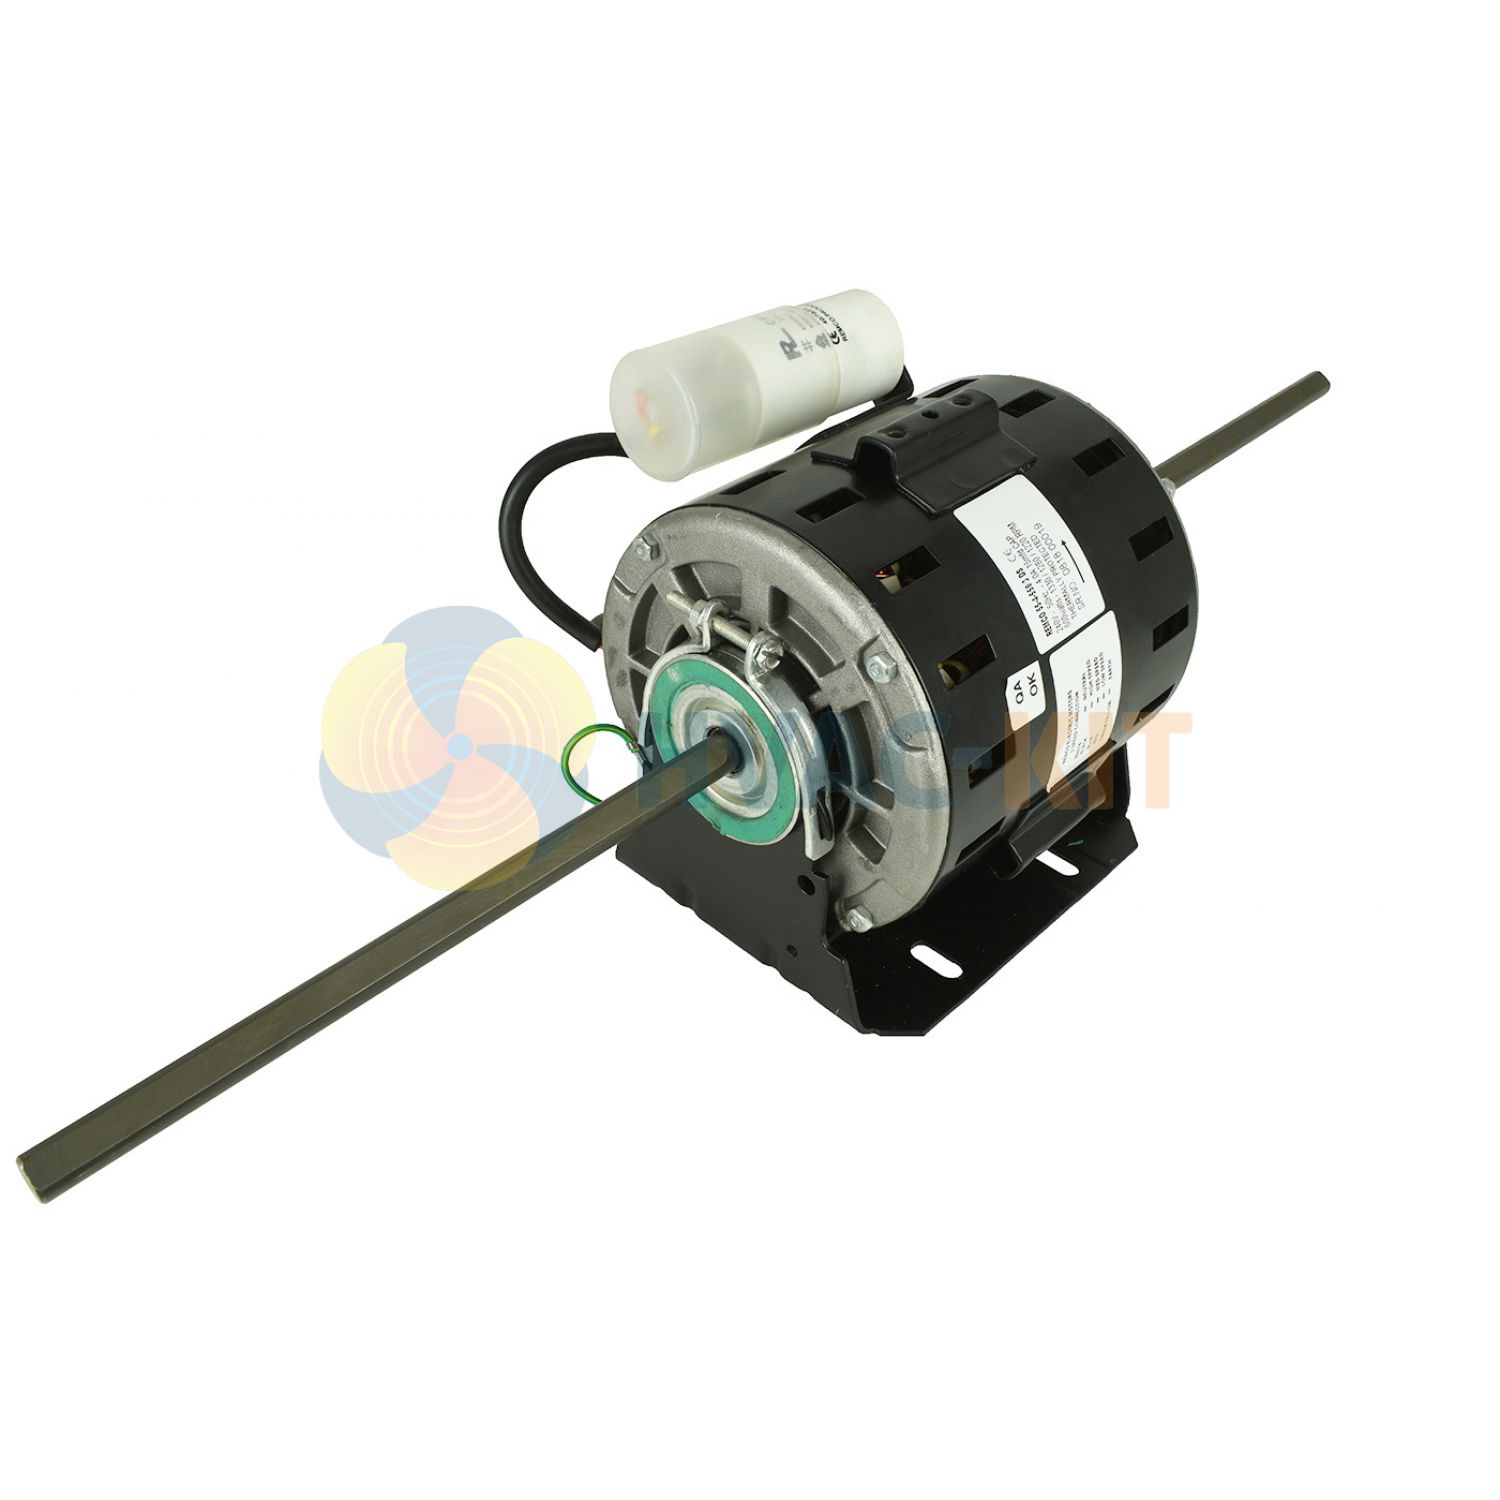 55-4-550/3DS_2 Resilient Base Mount Motor (55R/B56)